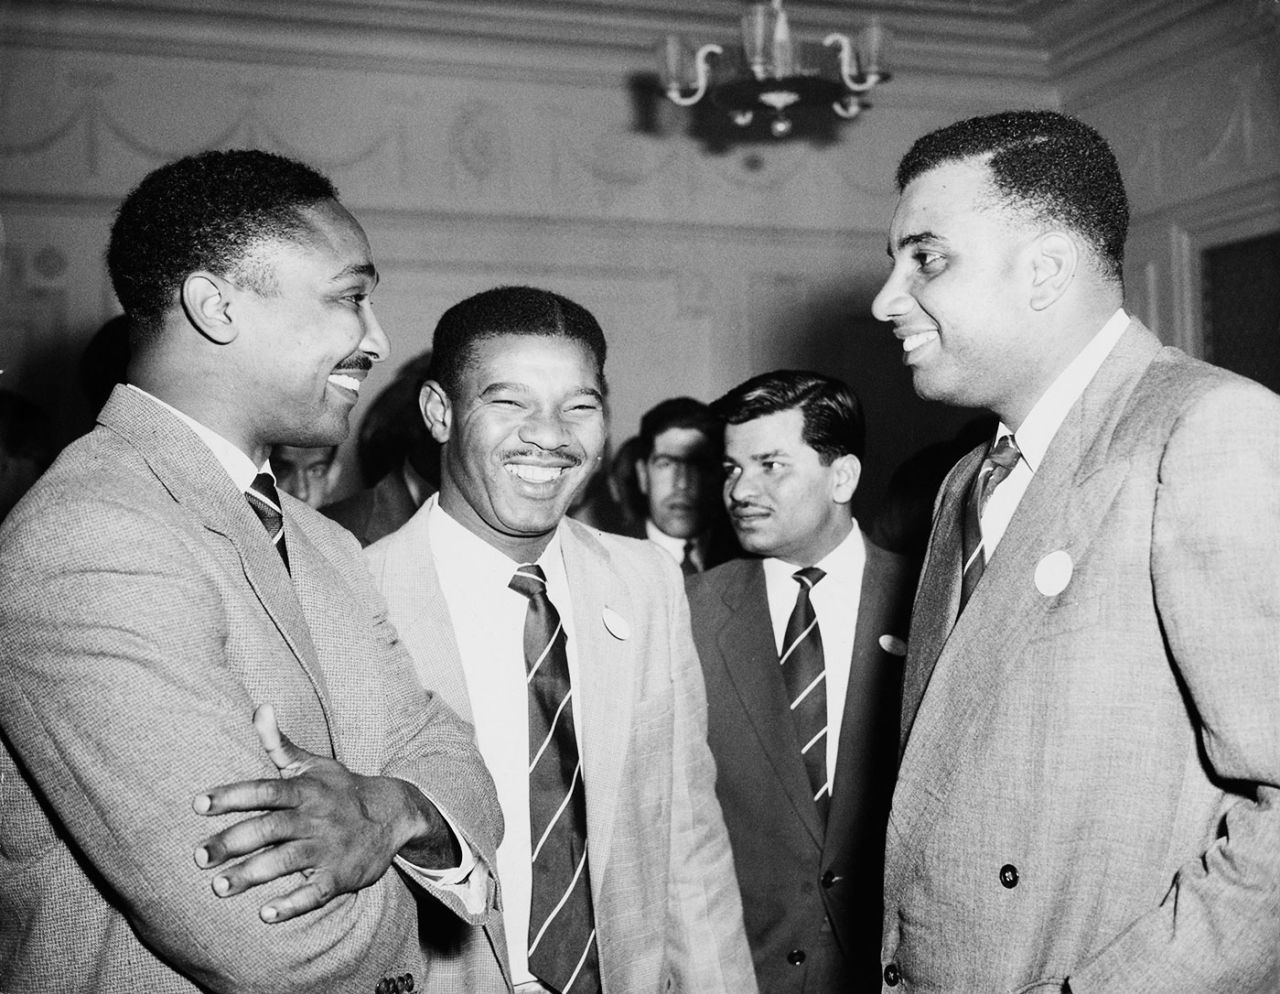 Frank Worrell, Everton Weekes and Clyde Walcott attend a party at the West Indian club in London, April 15, 1957